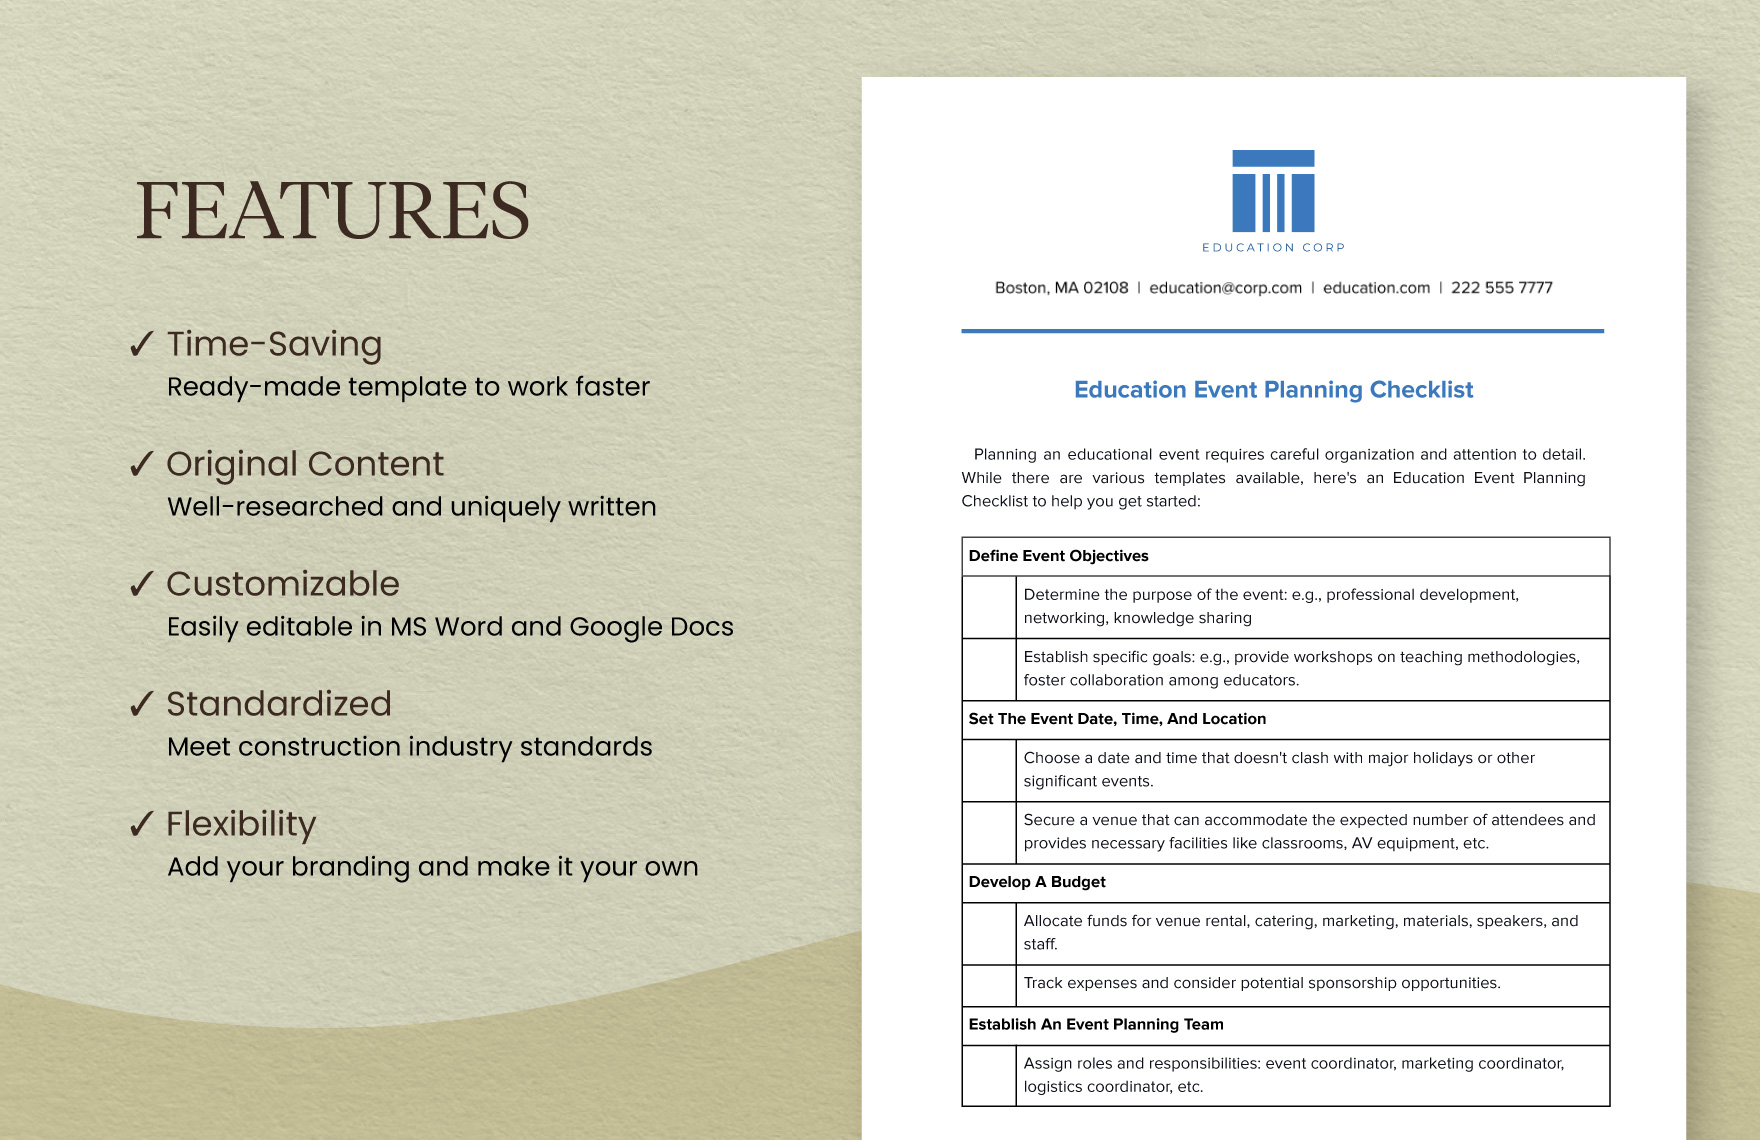 Education Event Planning Checklist Template